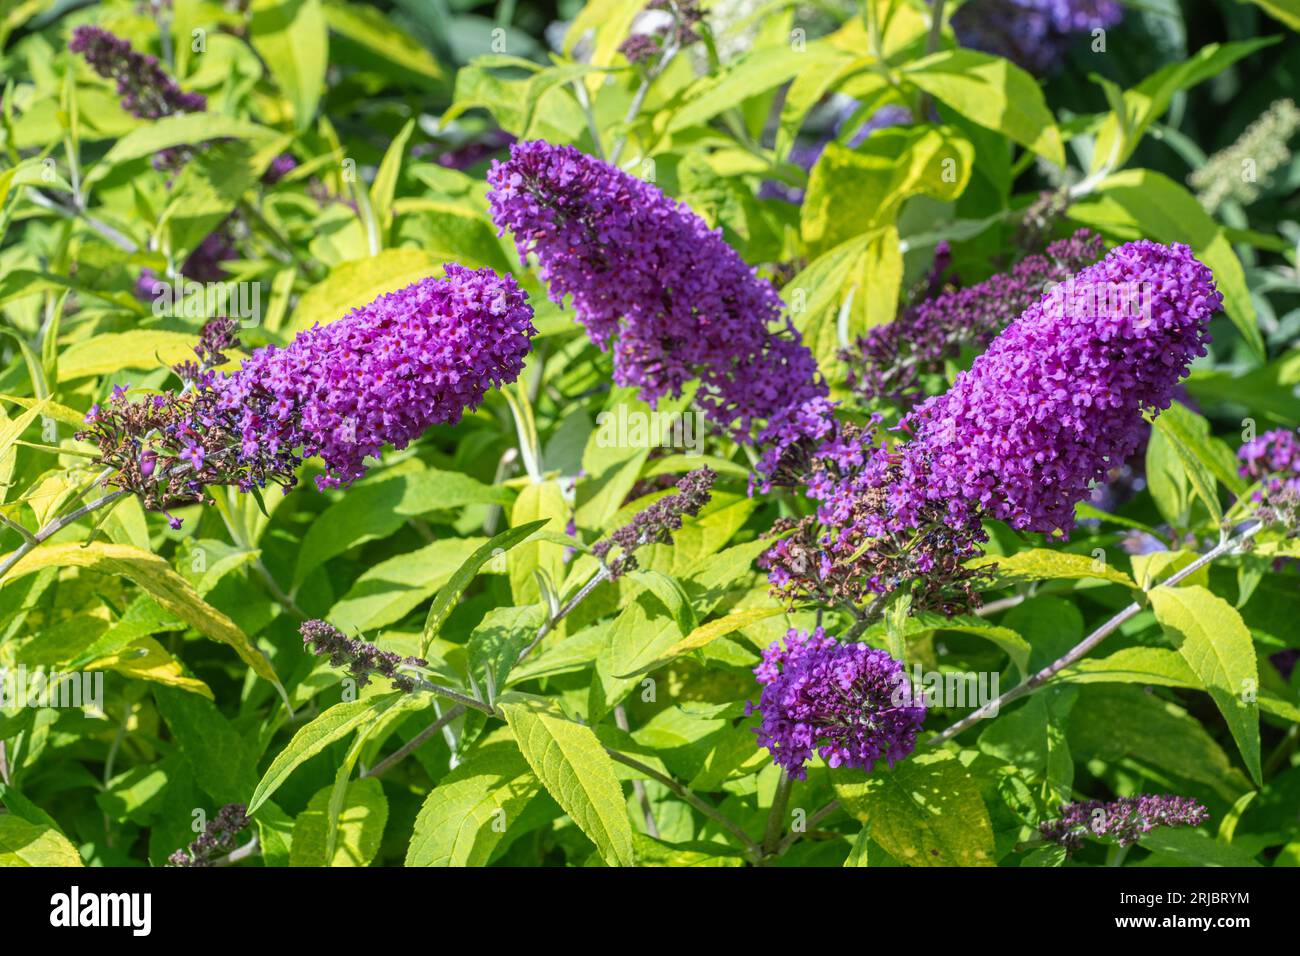 Buddleja davidii 'Moonshine' (Buddleia variety), known as a butterfly bush, flowering in Summer or August, England, UK Stock Photo